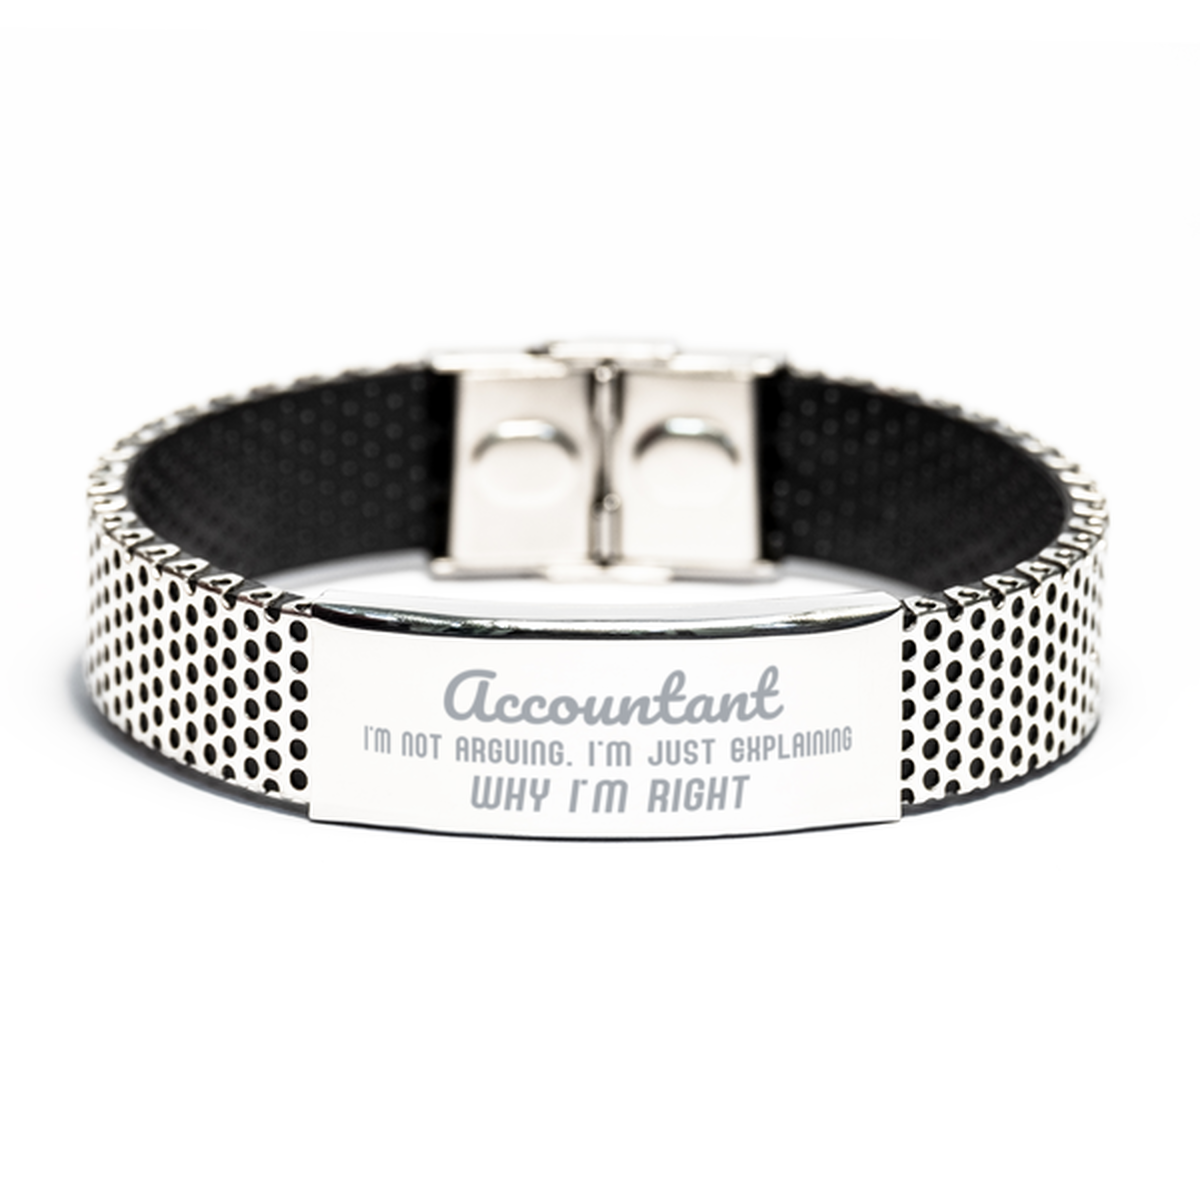 Accountant I'm not Arguing. I'm Just Explaining Why I'm RIGHT Stainless Steel Bracelet, Funny Saying Quote Accountant Gifts For Accountant Graduation Birthday Christmas Gifts for Men Women Coworker